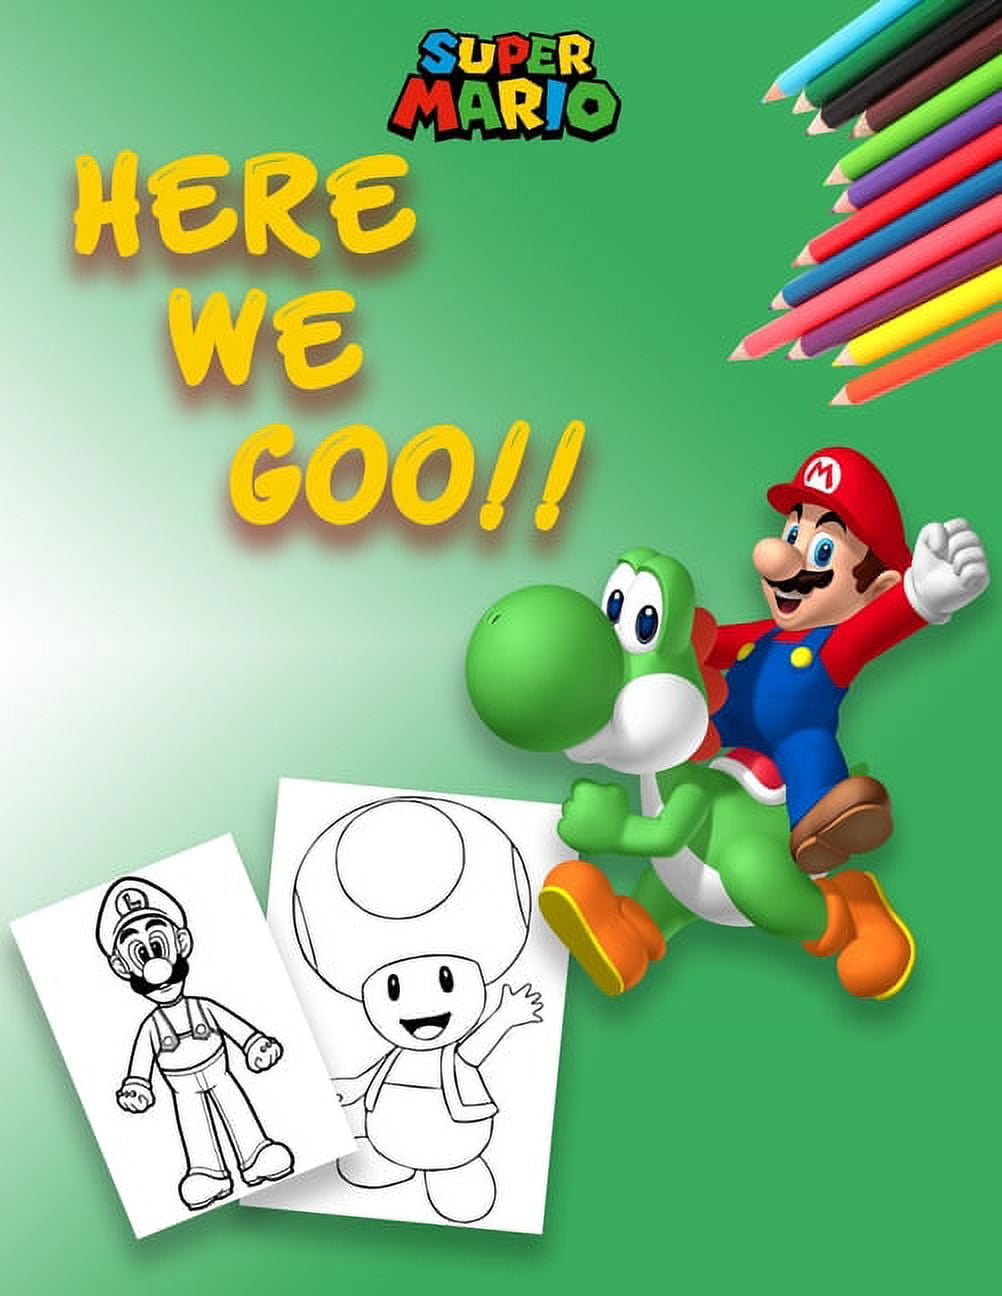 Super mario here we goo super mario coloring book illustrations mario brothers coloring books for kids ideal gift for those who love super mario bros pages inches paperback